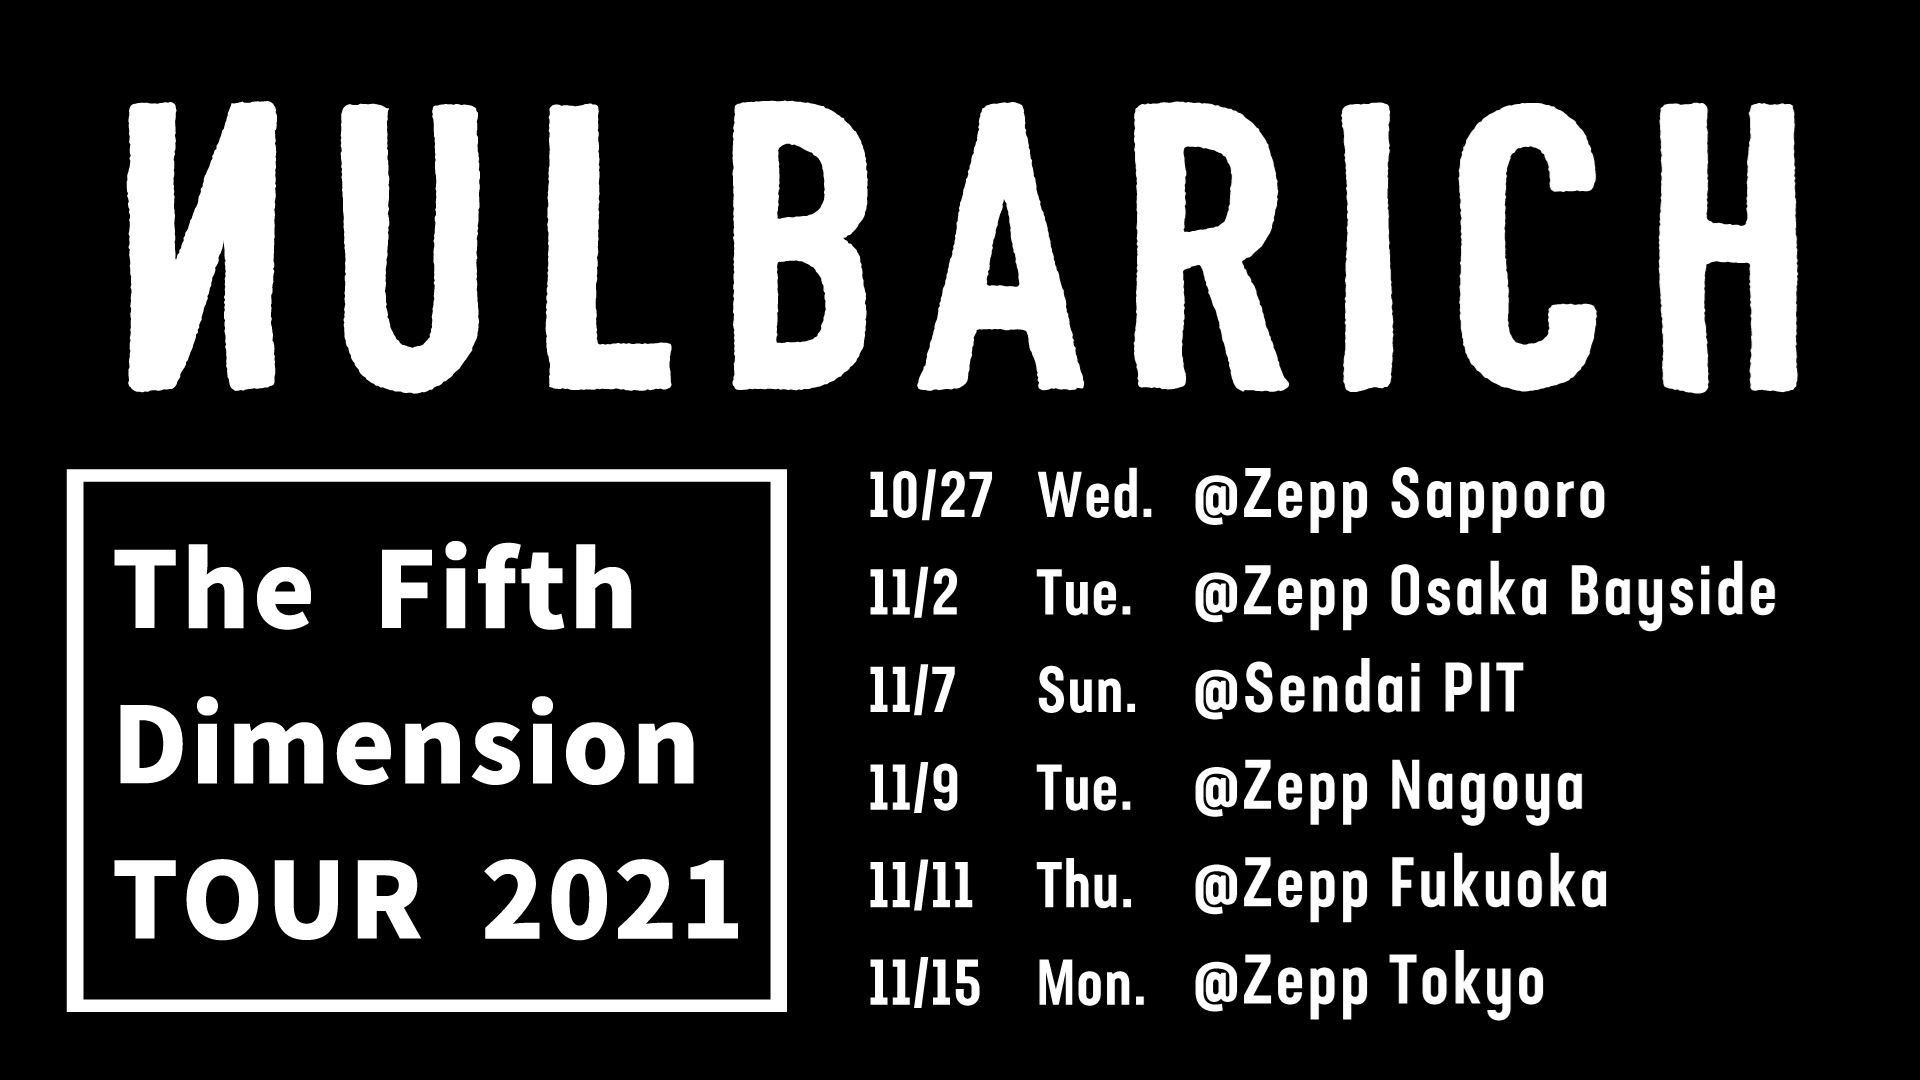 『Nulbarich The Fifth Dimension TOUR 2021』ツアースケジュール